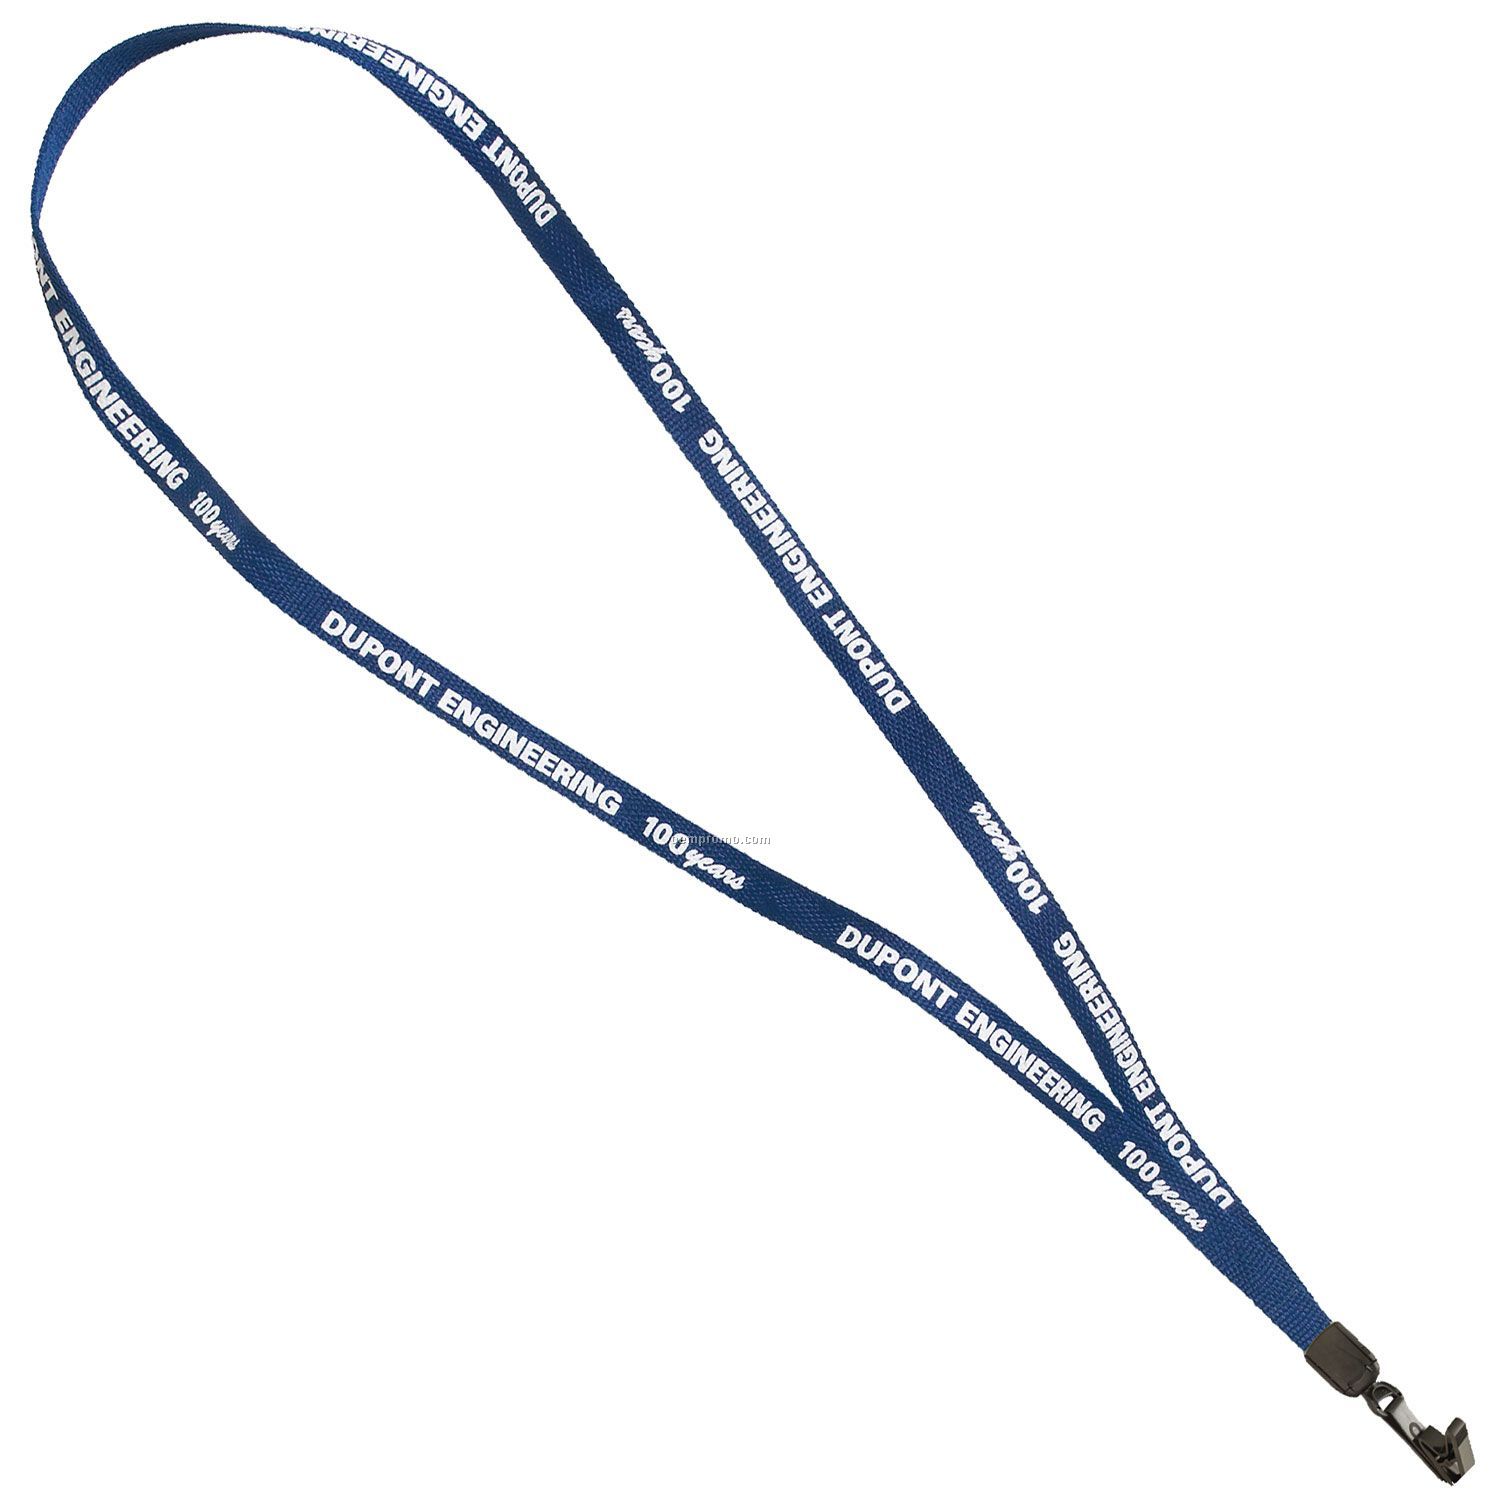 Lanyard W/ Biodegradable Fabric (3/8" Wide) - 4 Hour Service